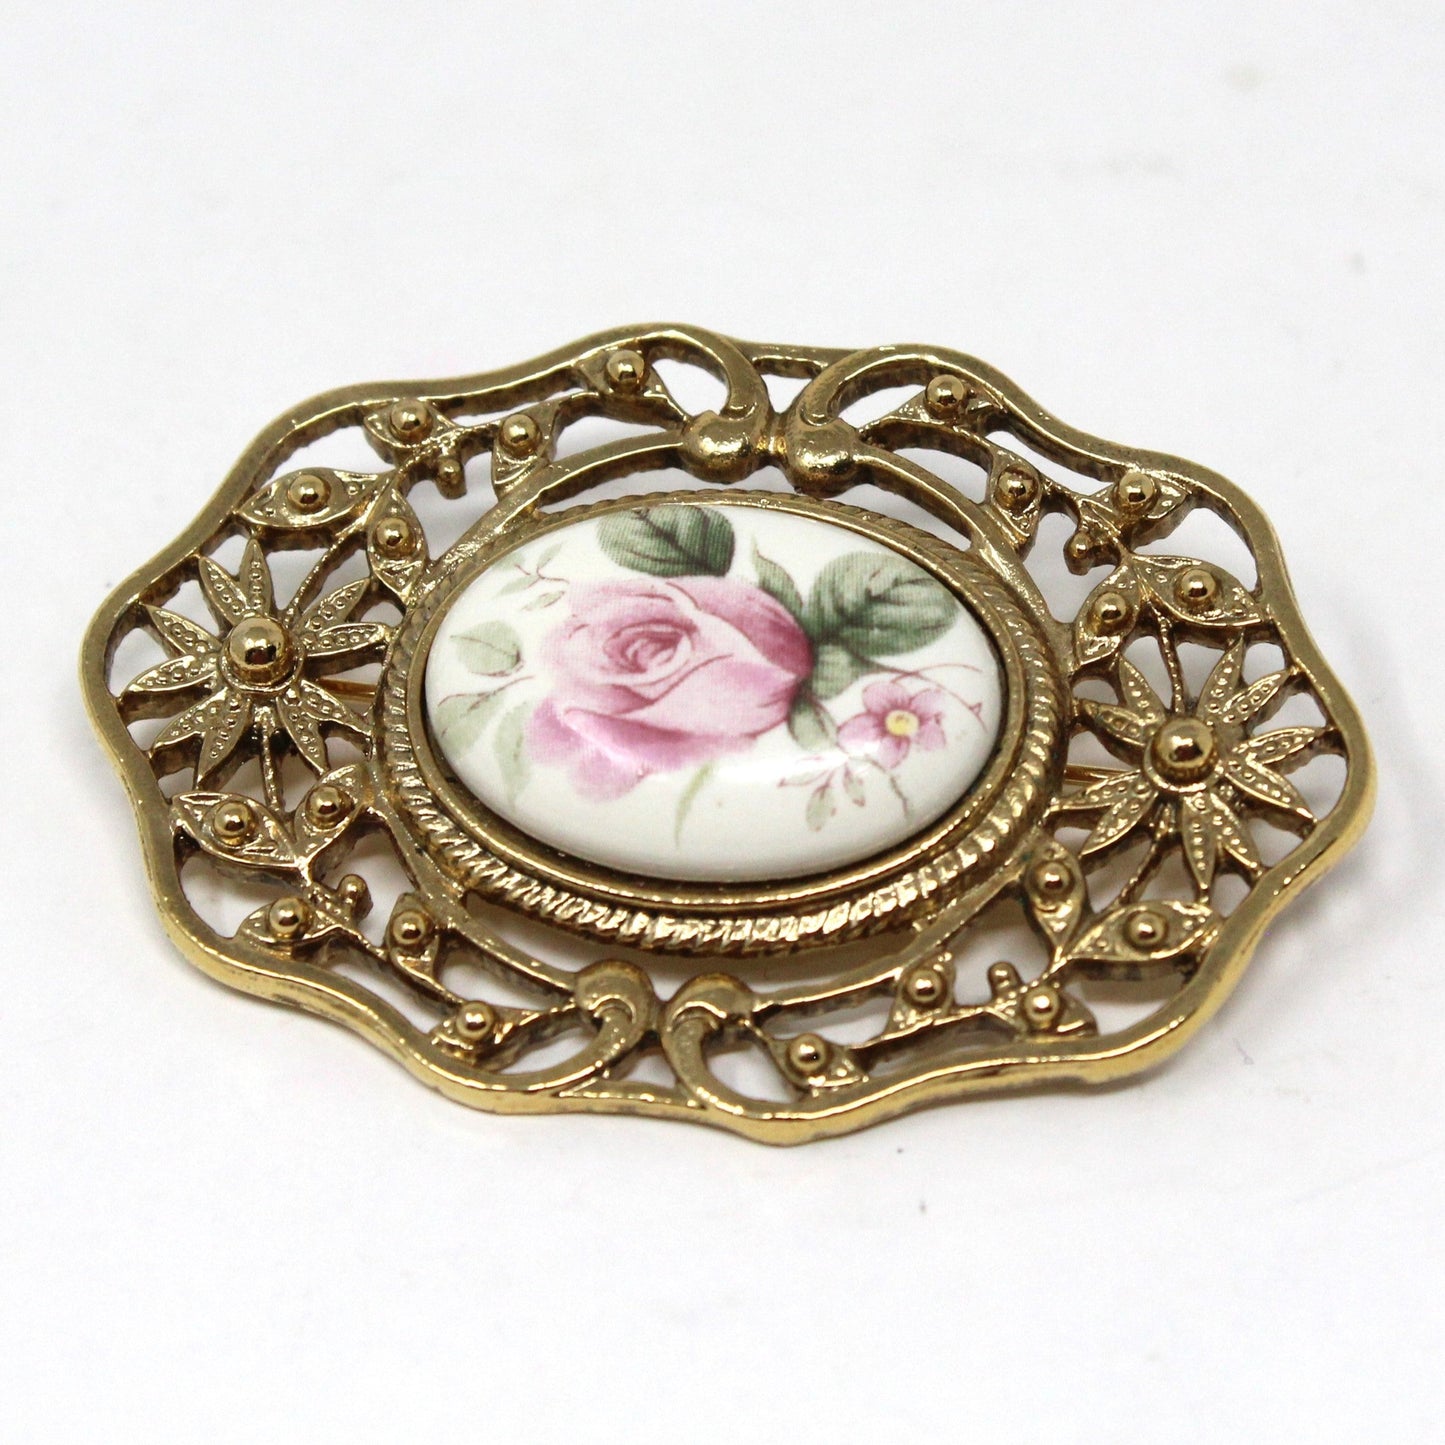 Brooch / Pin, 1928 Jewelry Co, Victorian Style with Pink Rose Porcelain Cameo, Gold Filigree